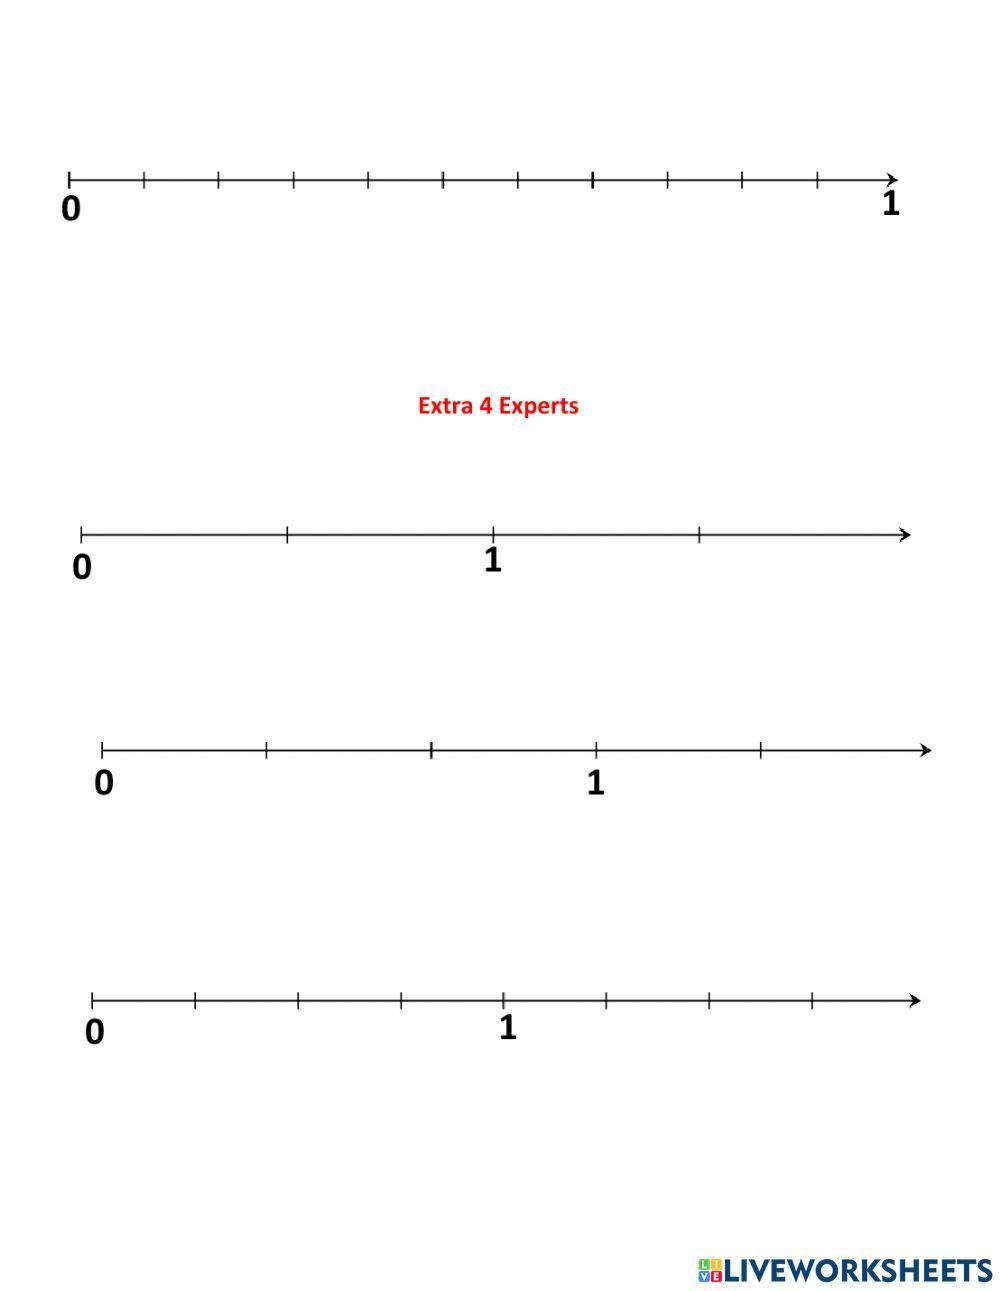 Fractions on a number line